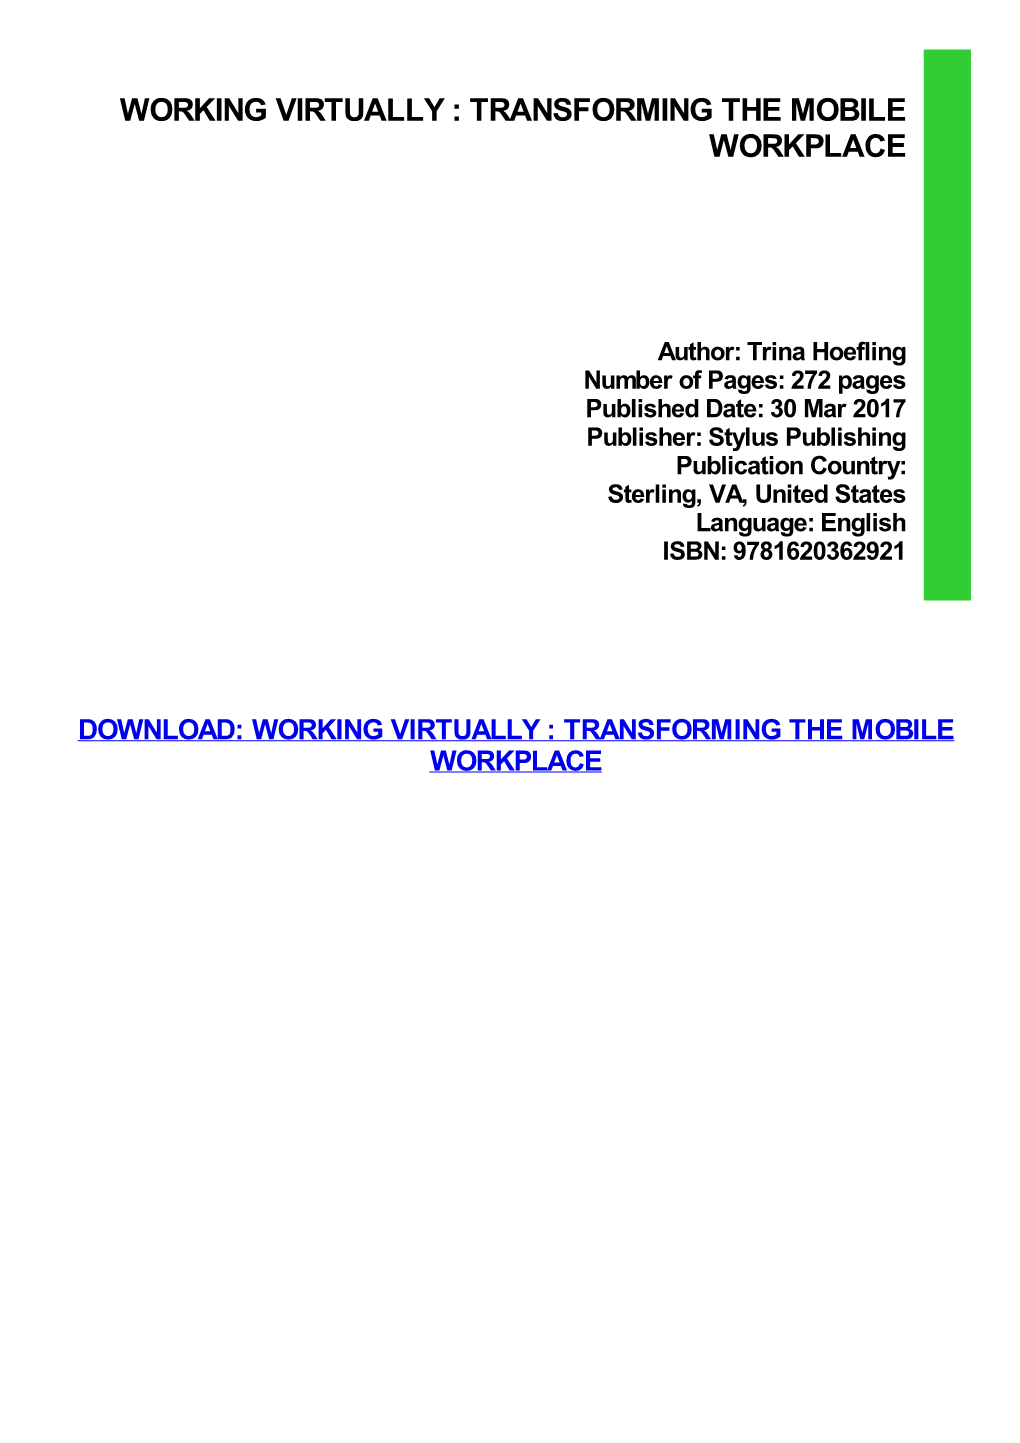 Working Virtually : Transforming the Mobile Workplace